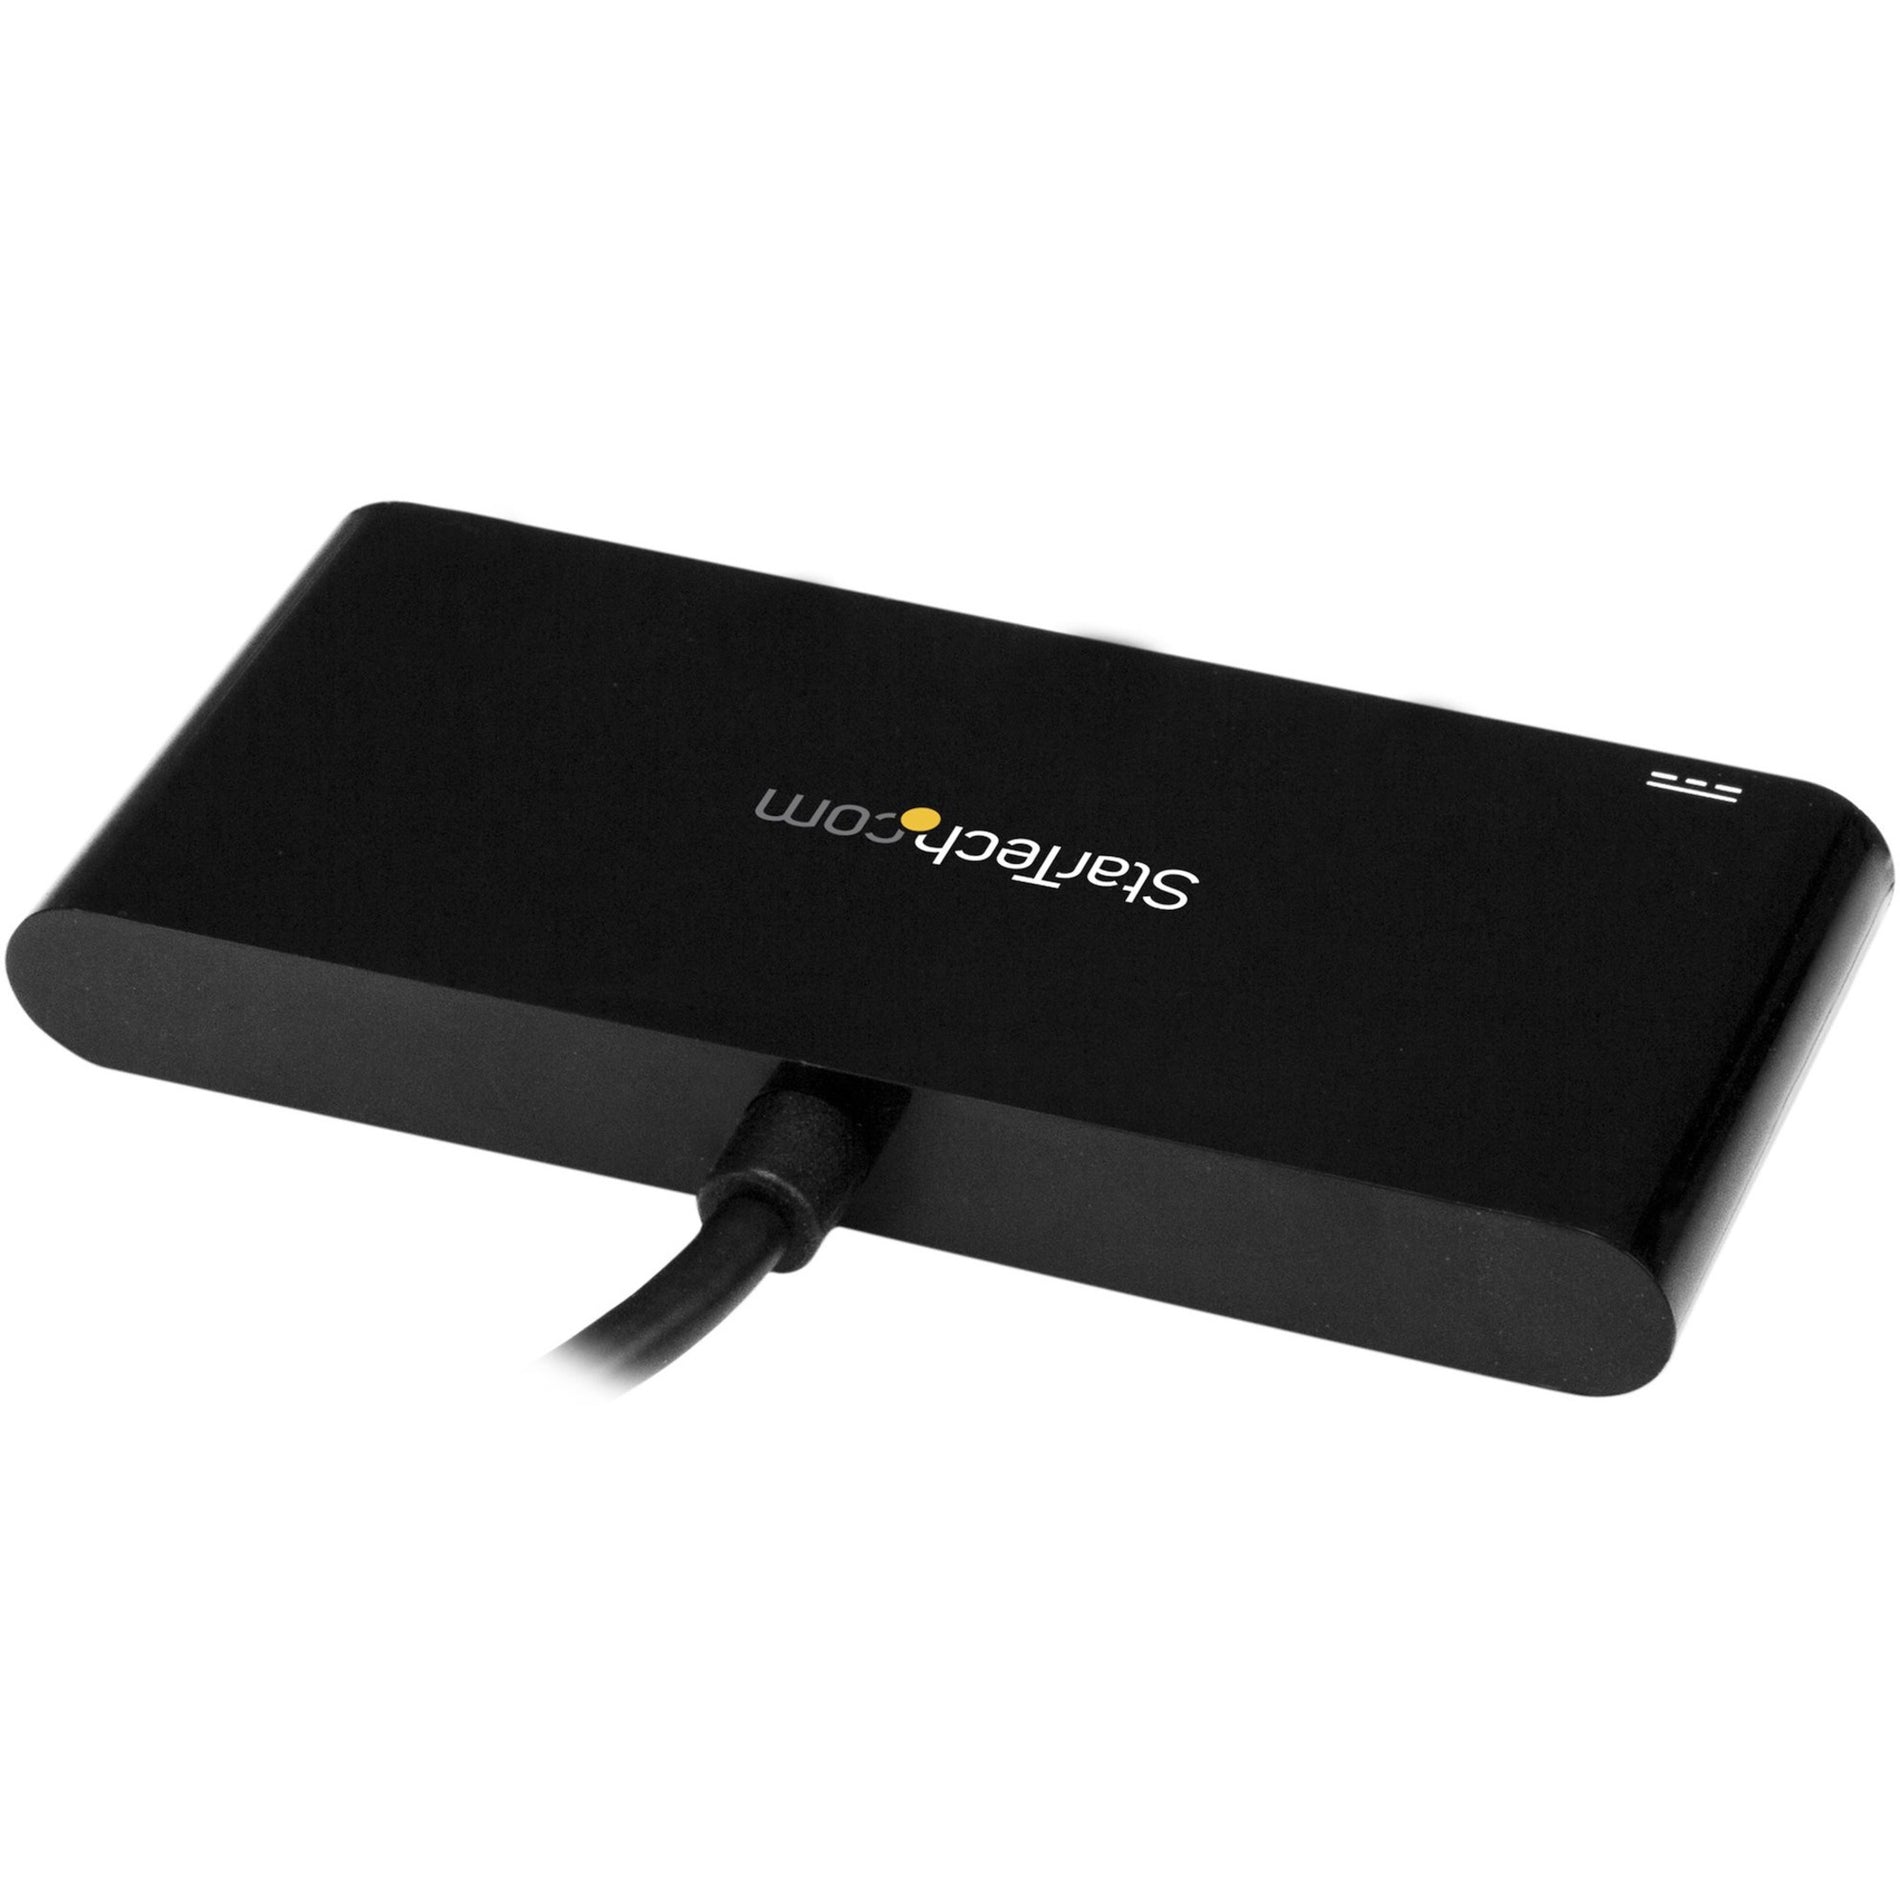 StarTech.com HB30C4AFPD 4-Port USB-C Hub with Power Delivery - USB-C to 4x USB-A - USB 3.0 Hub, Expand Your USB Connectivity